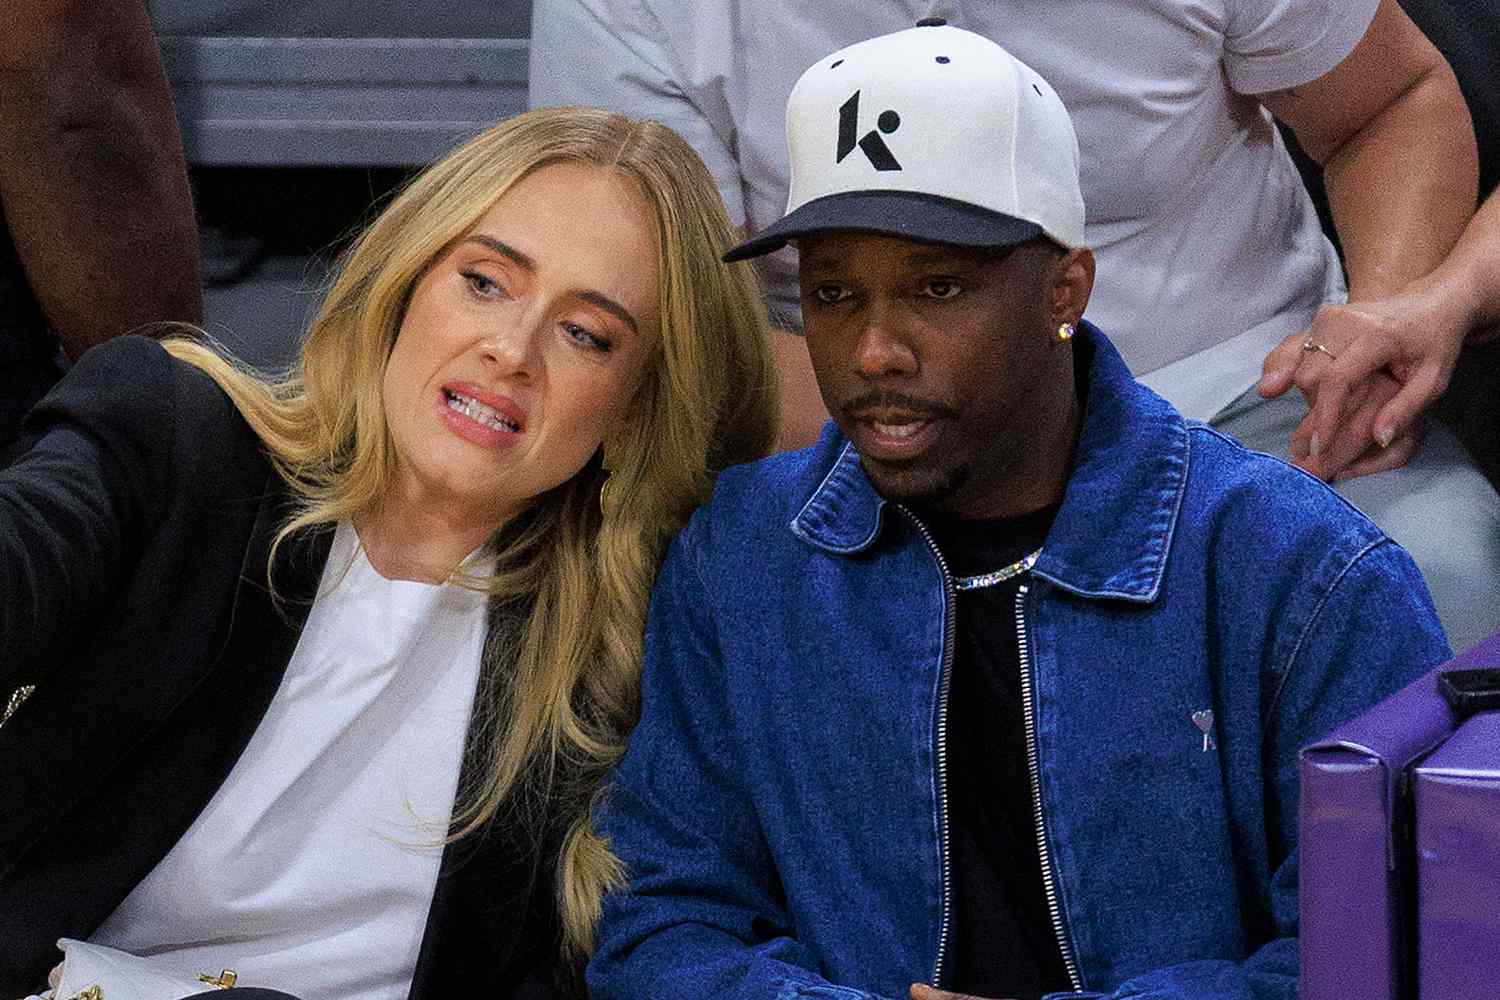 Adele and Rich Paul Have Courtside Date Night at Los Angeles Lakers vs. Denver Nuggets Game